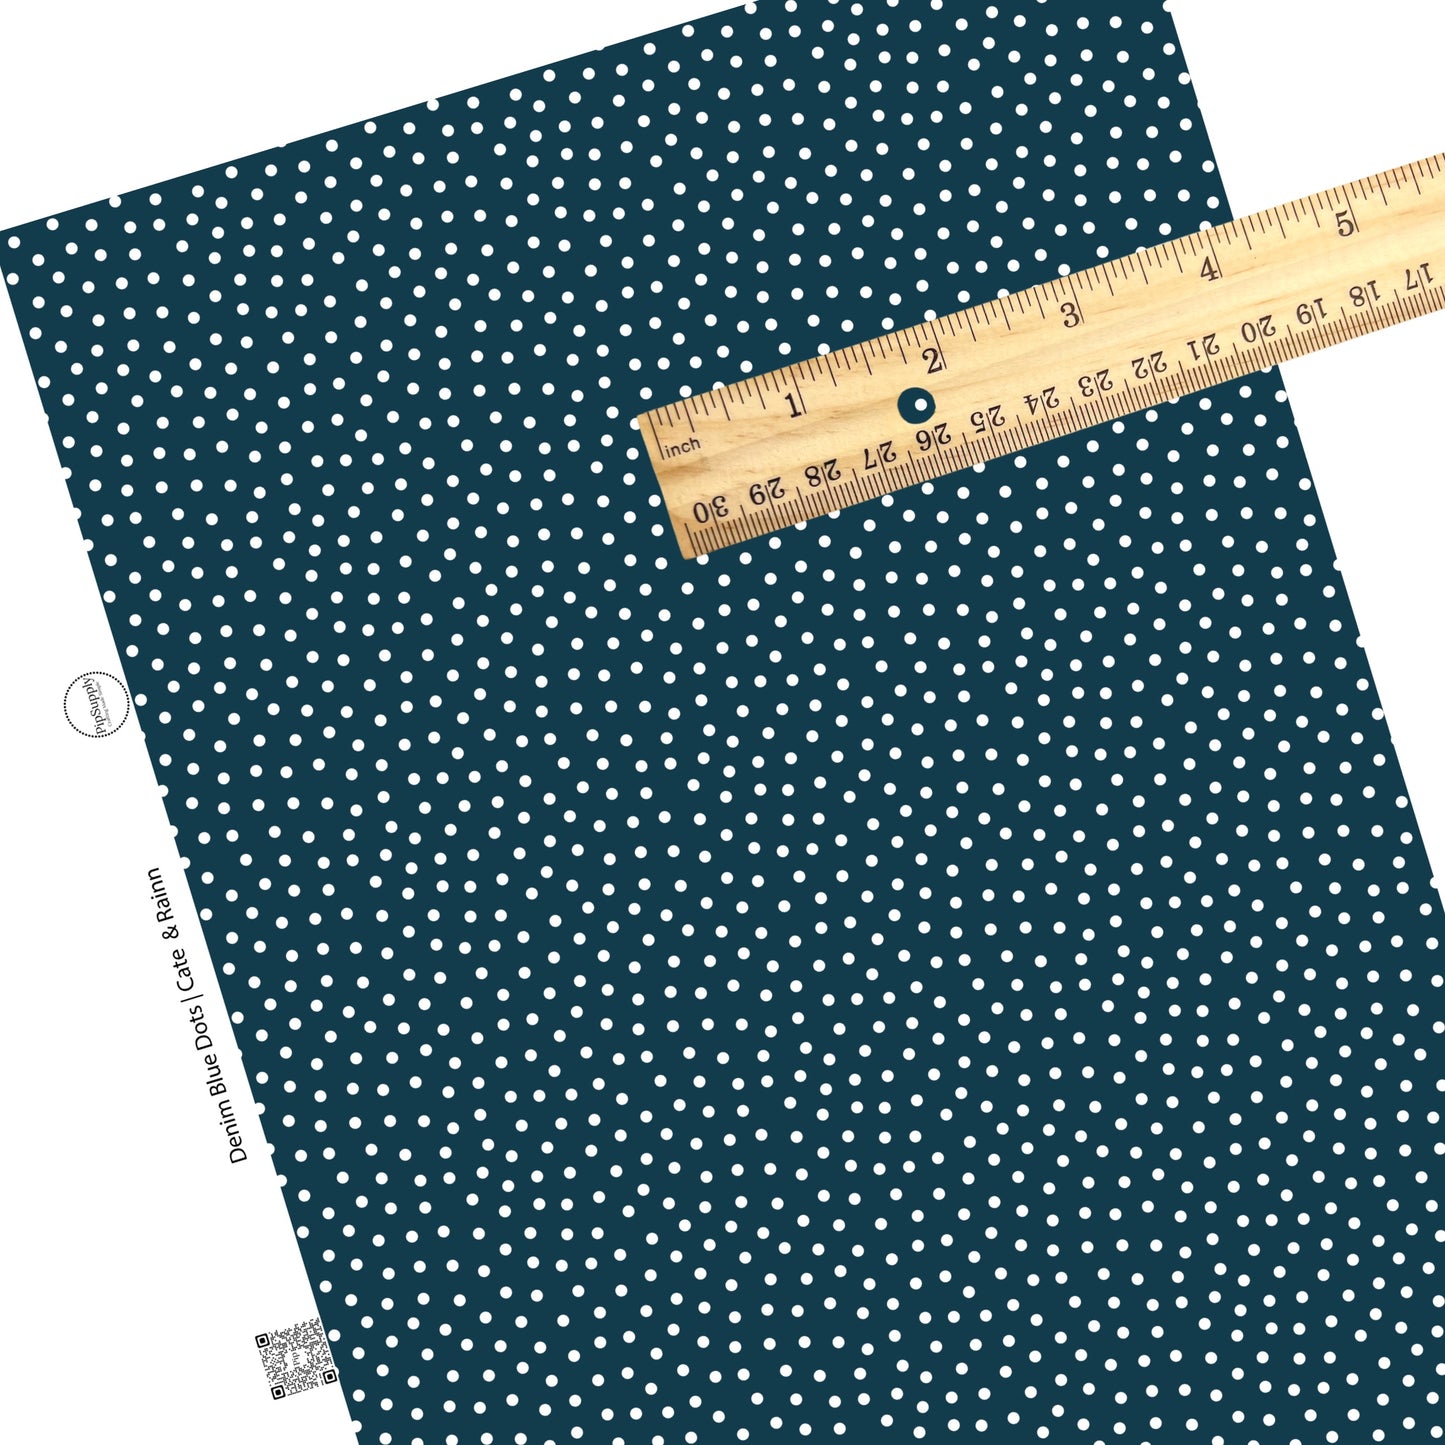 White polka dots on navy blue faux leather sheets